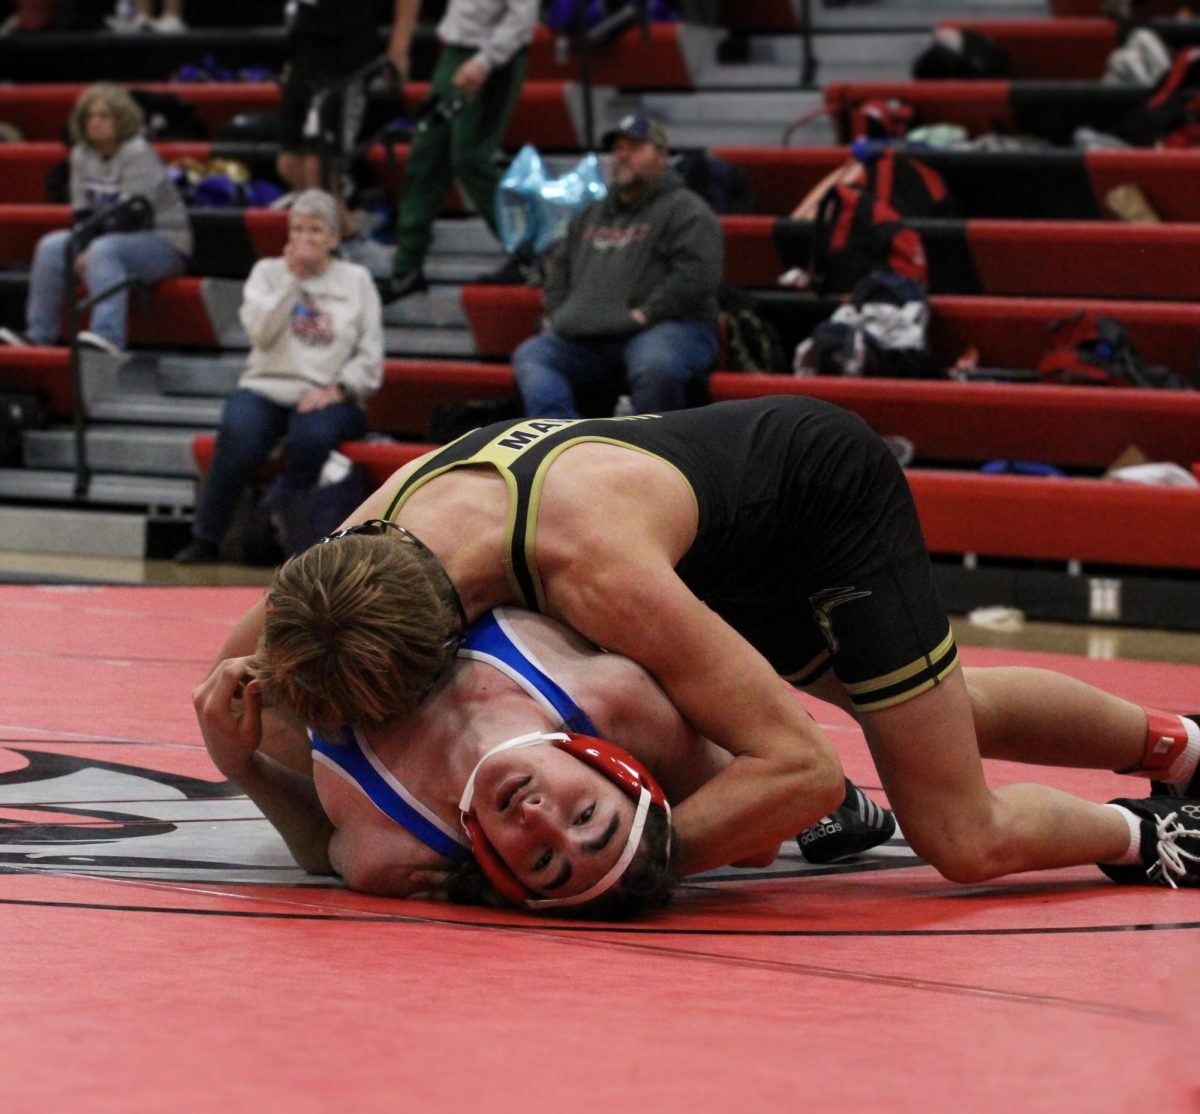 Wrestler pinning his opponent in the match.